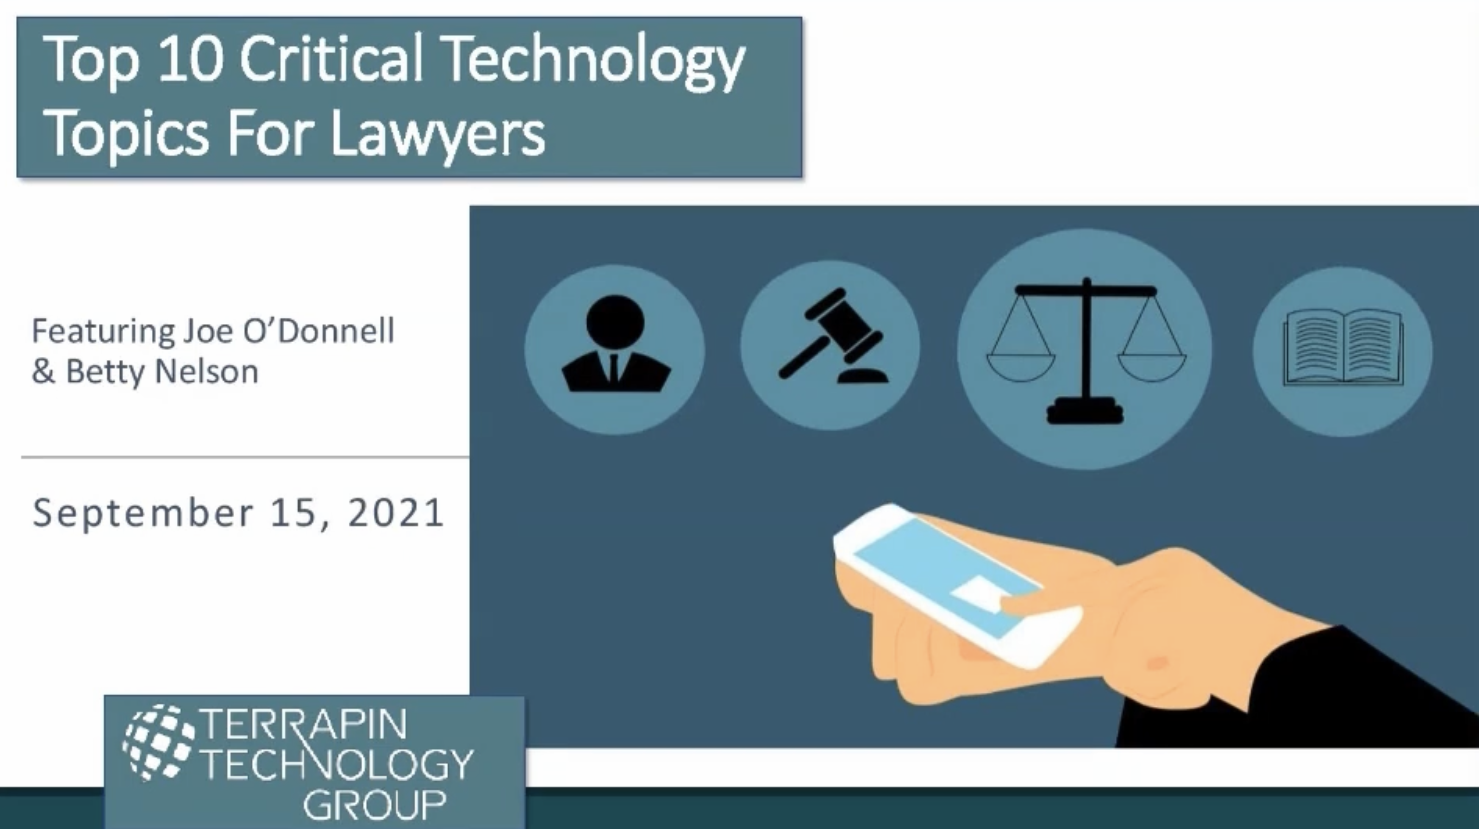 Top 10 Critical Technology Topics For Lawyers